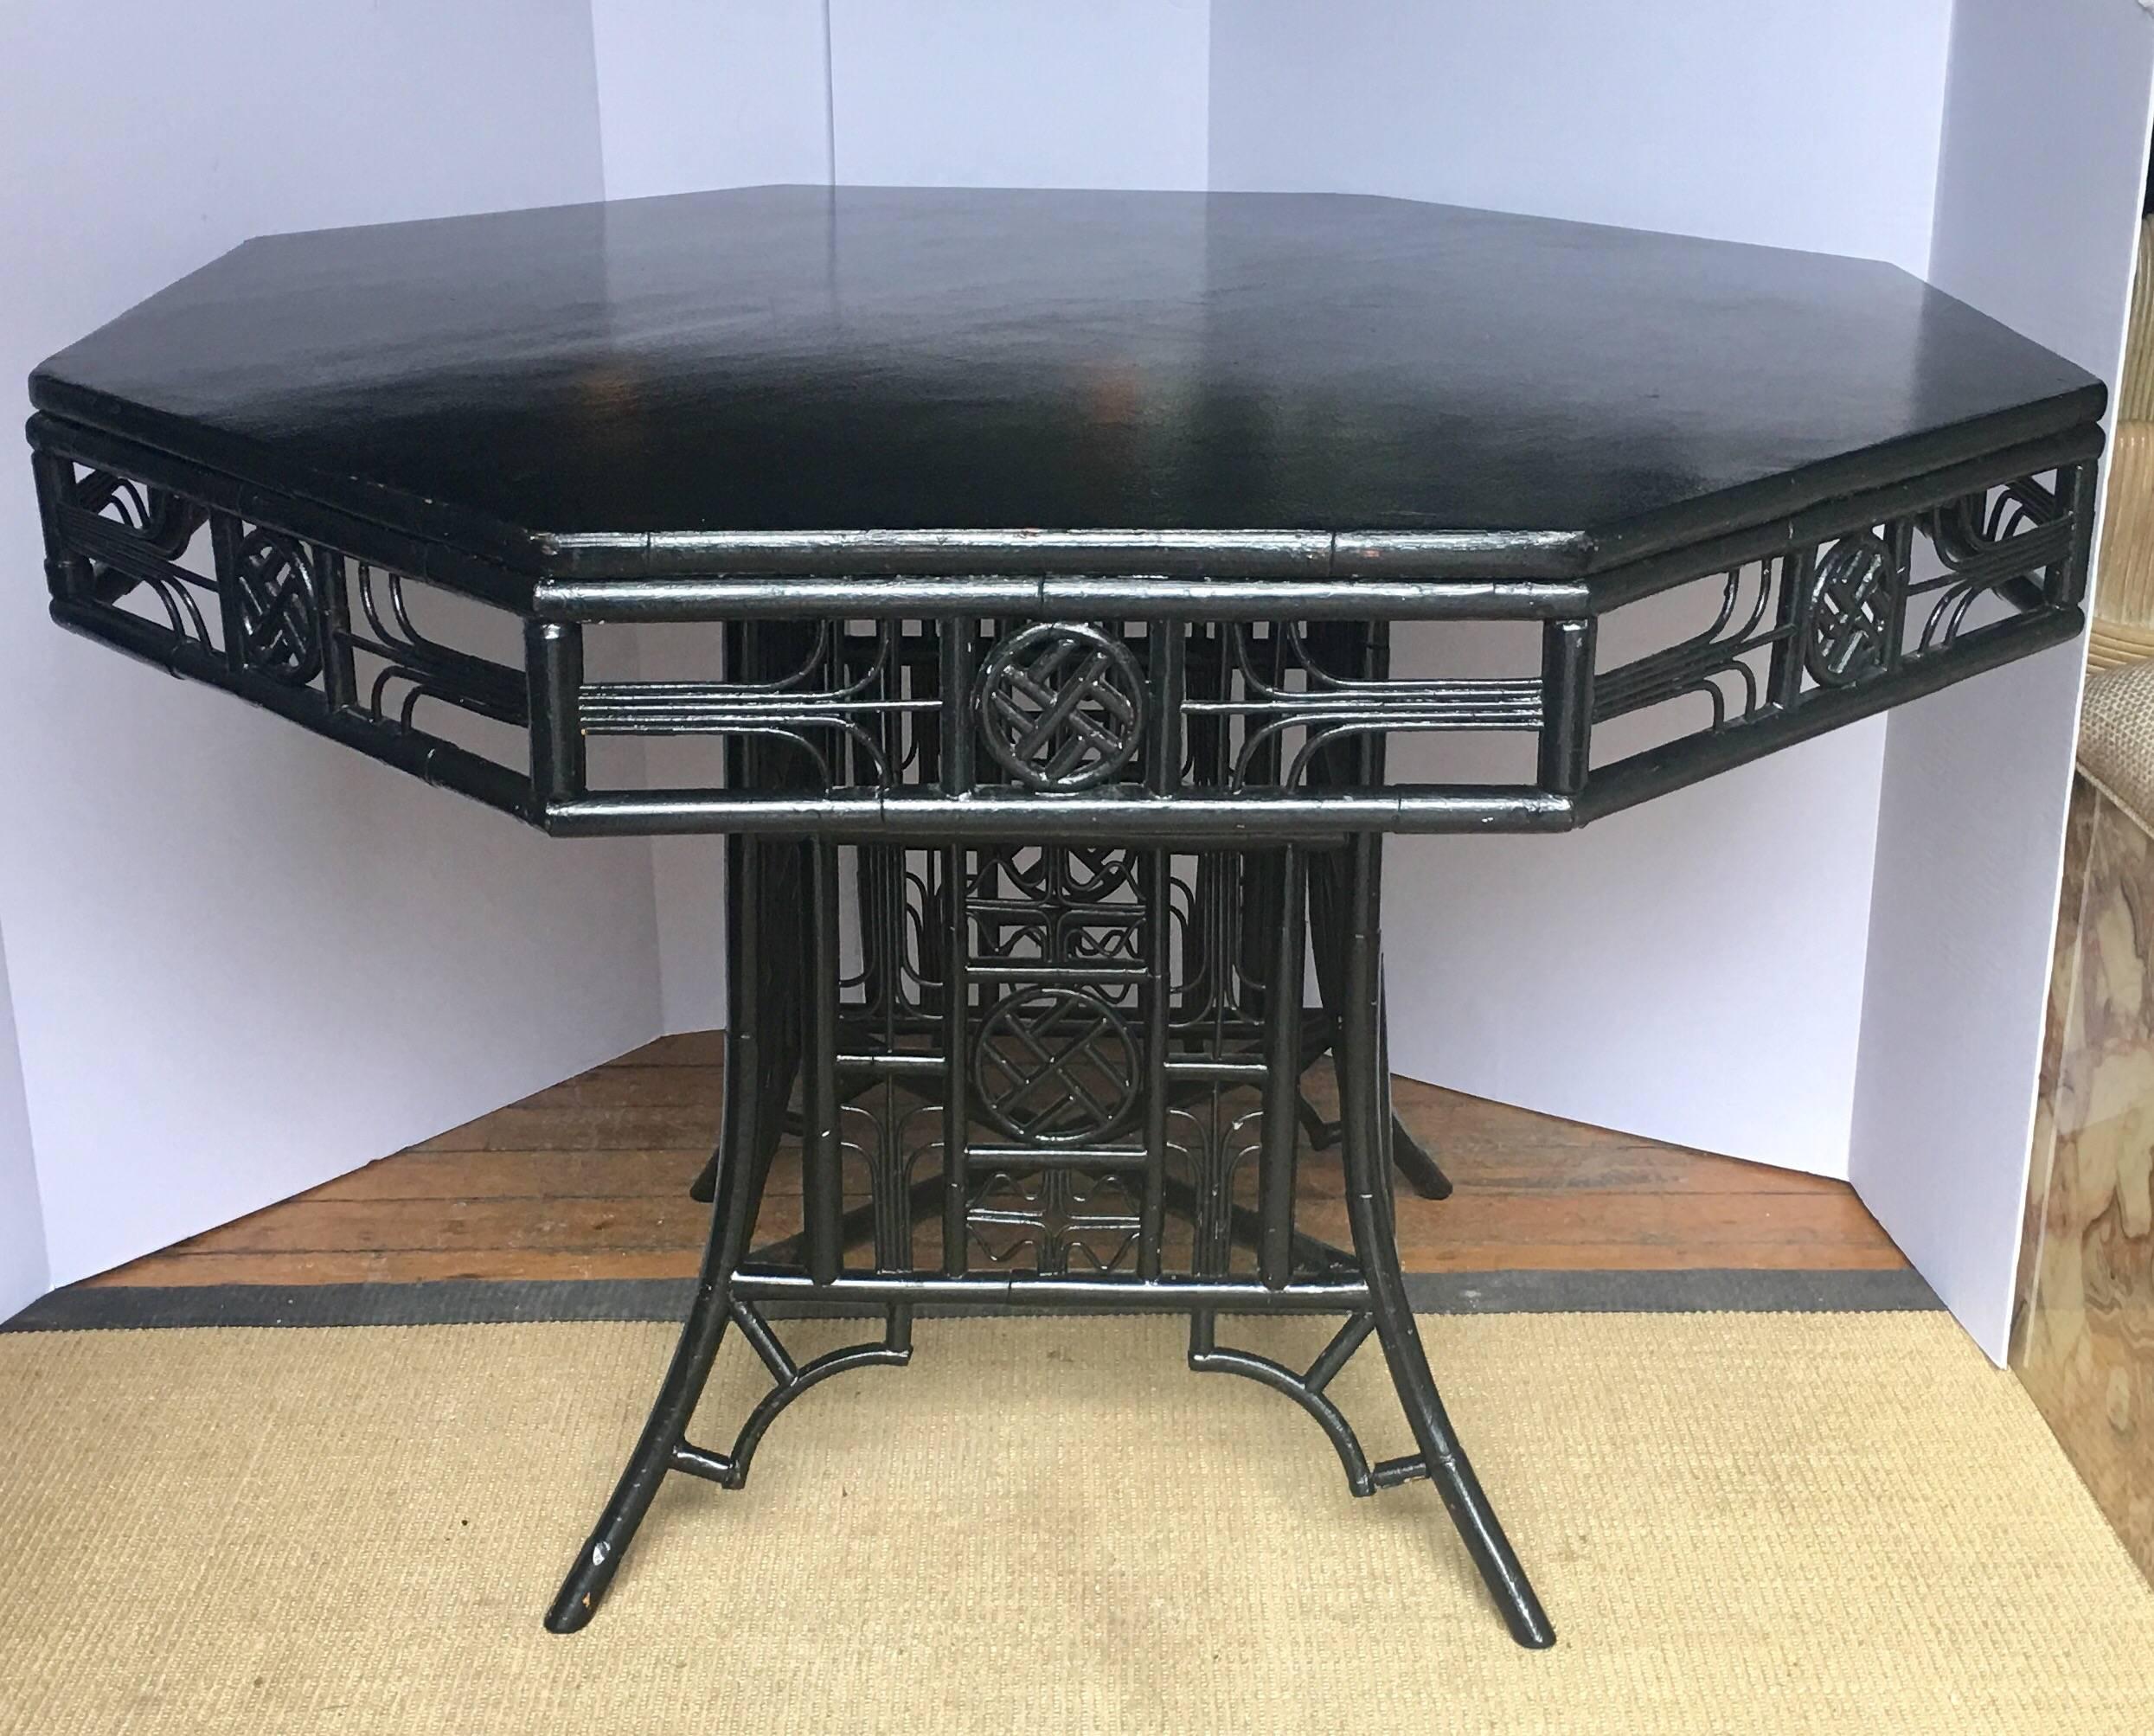 Chinoiserie style Asian motif octagon shaped dining table. Detailed fretwork bamboo wood frame features black gloss lacquer painted finish.  This sculptural piece could also be used as a center table or game table. 
Matching set of four dining